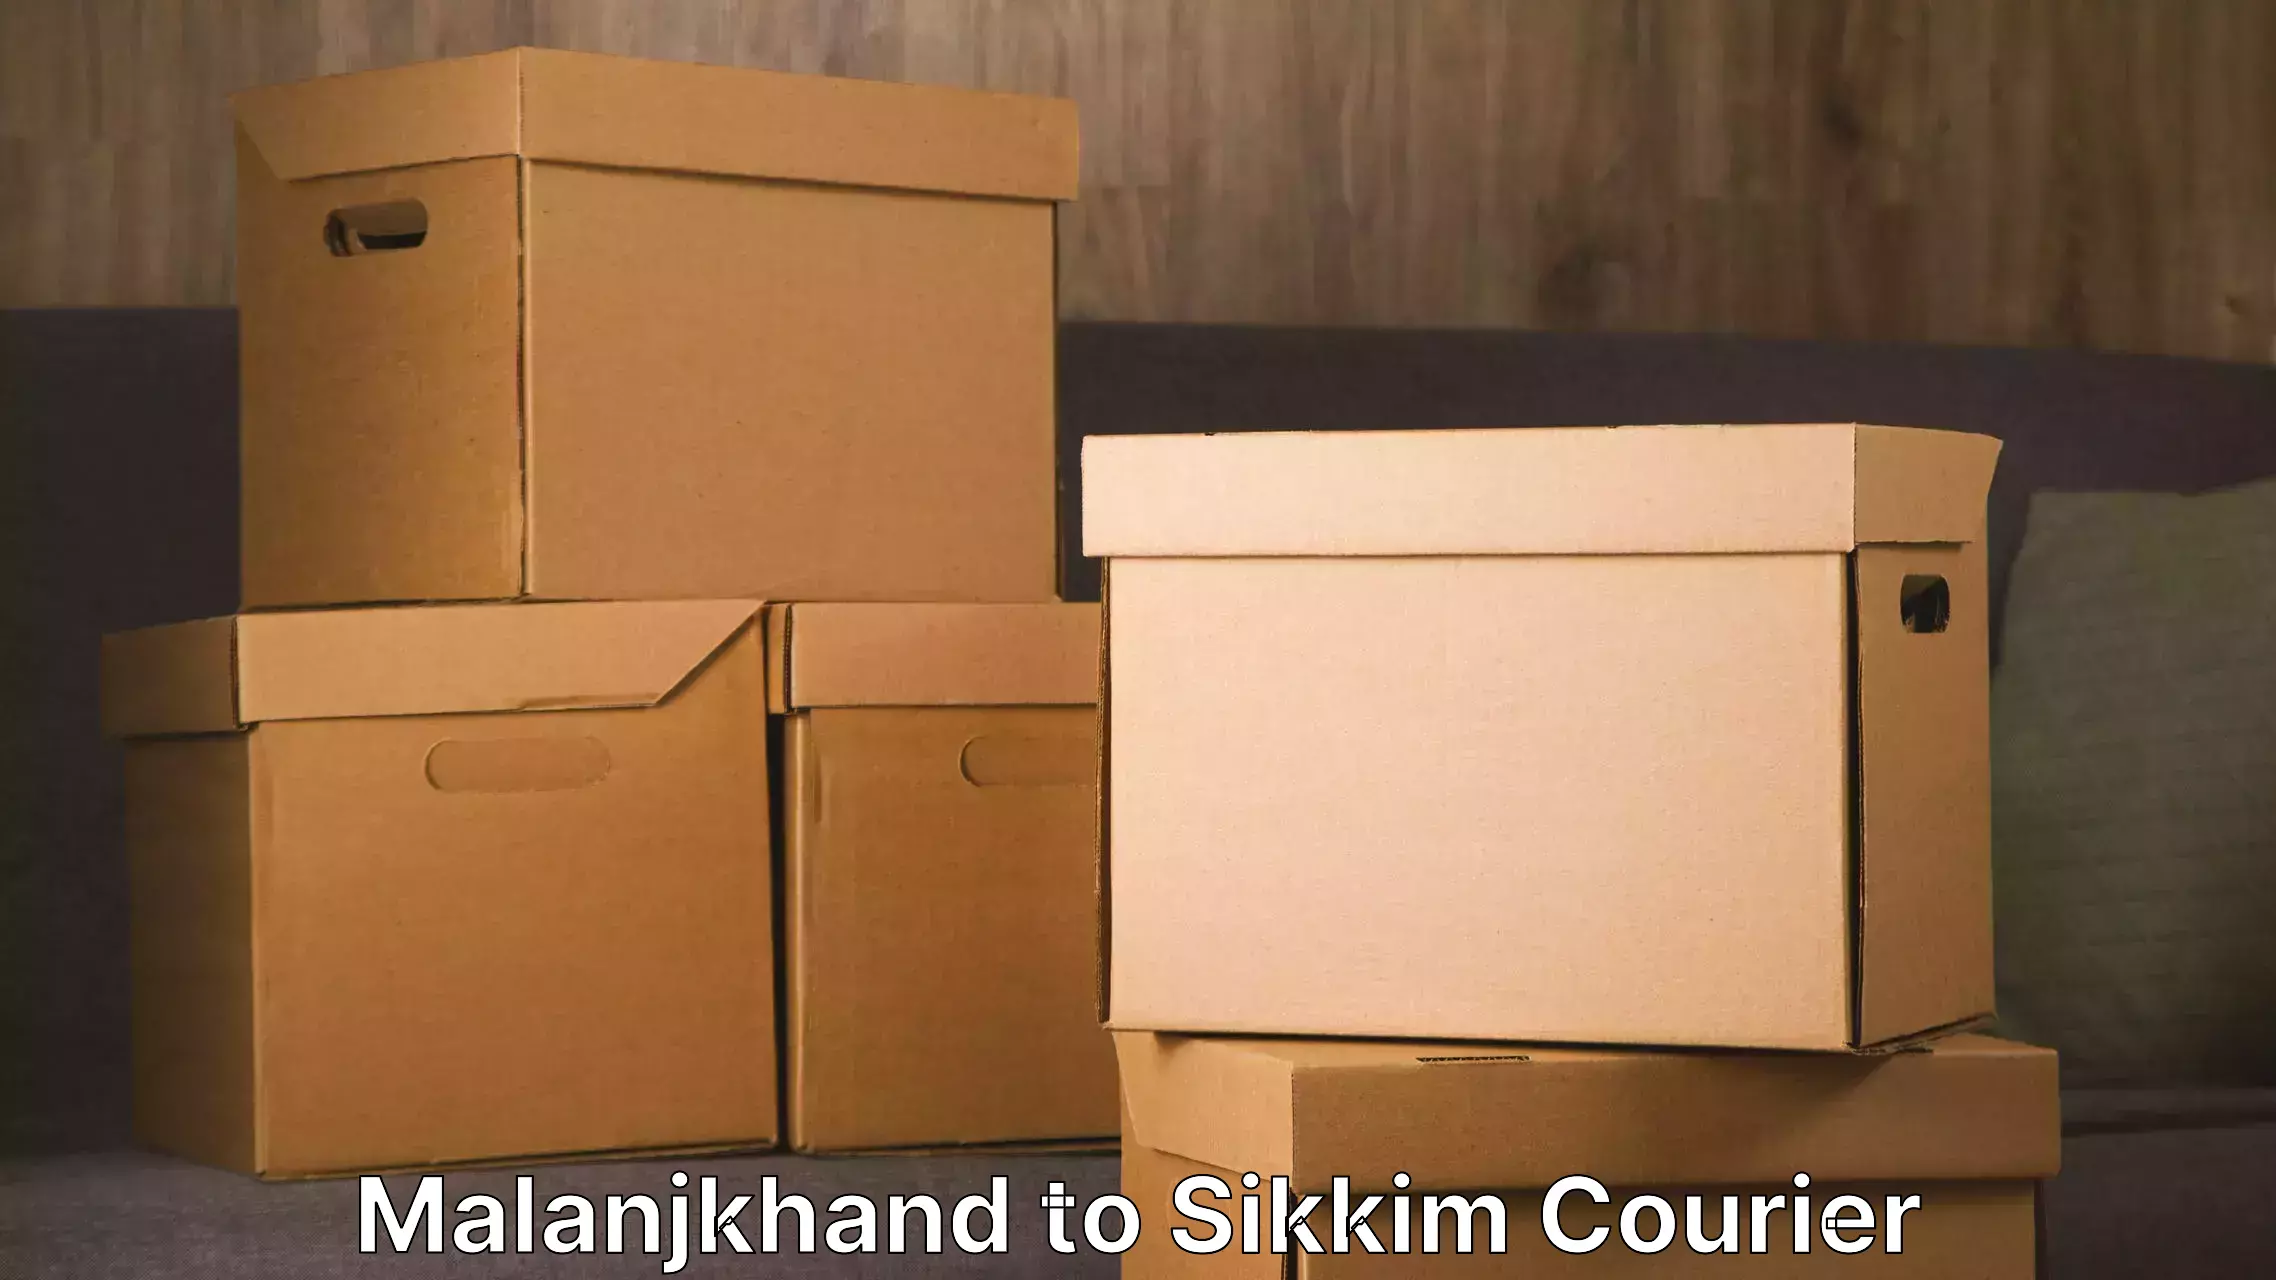 Moving and handling services in Malanjkhand to Pelling